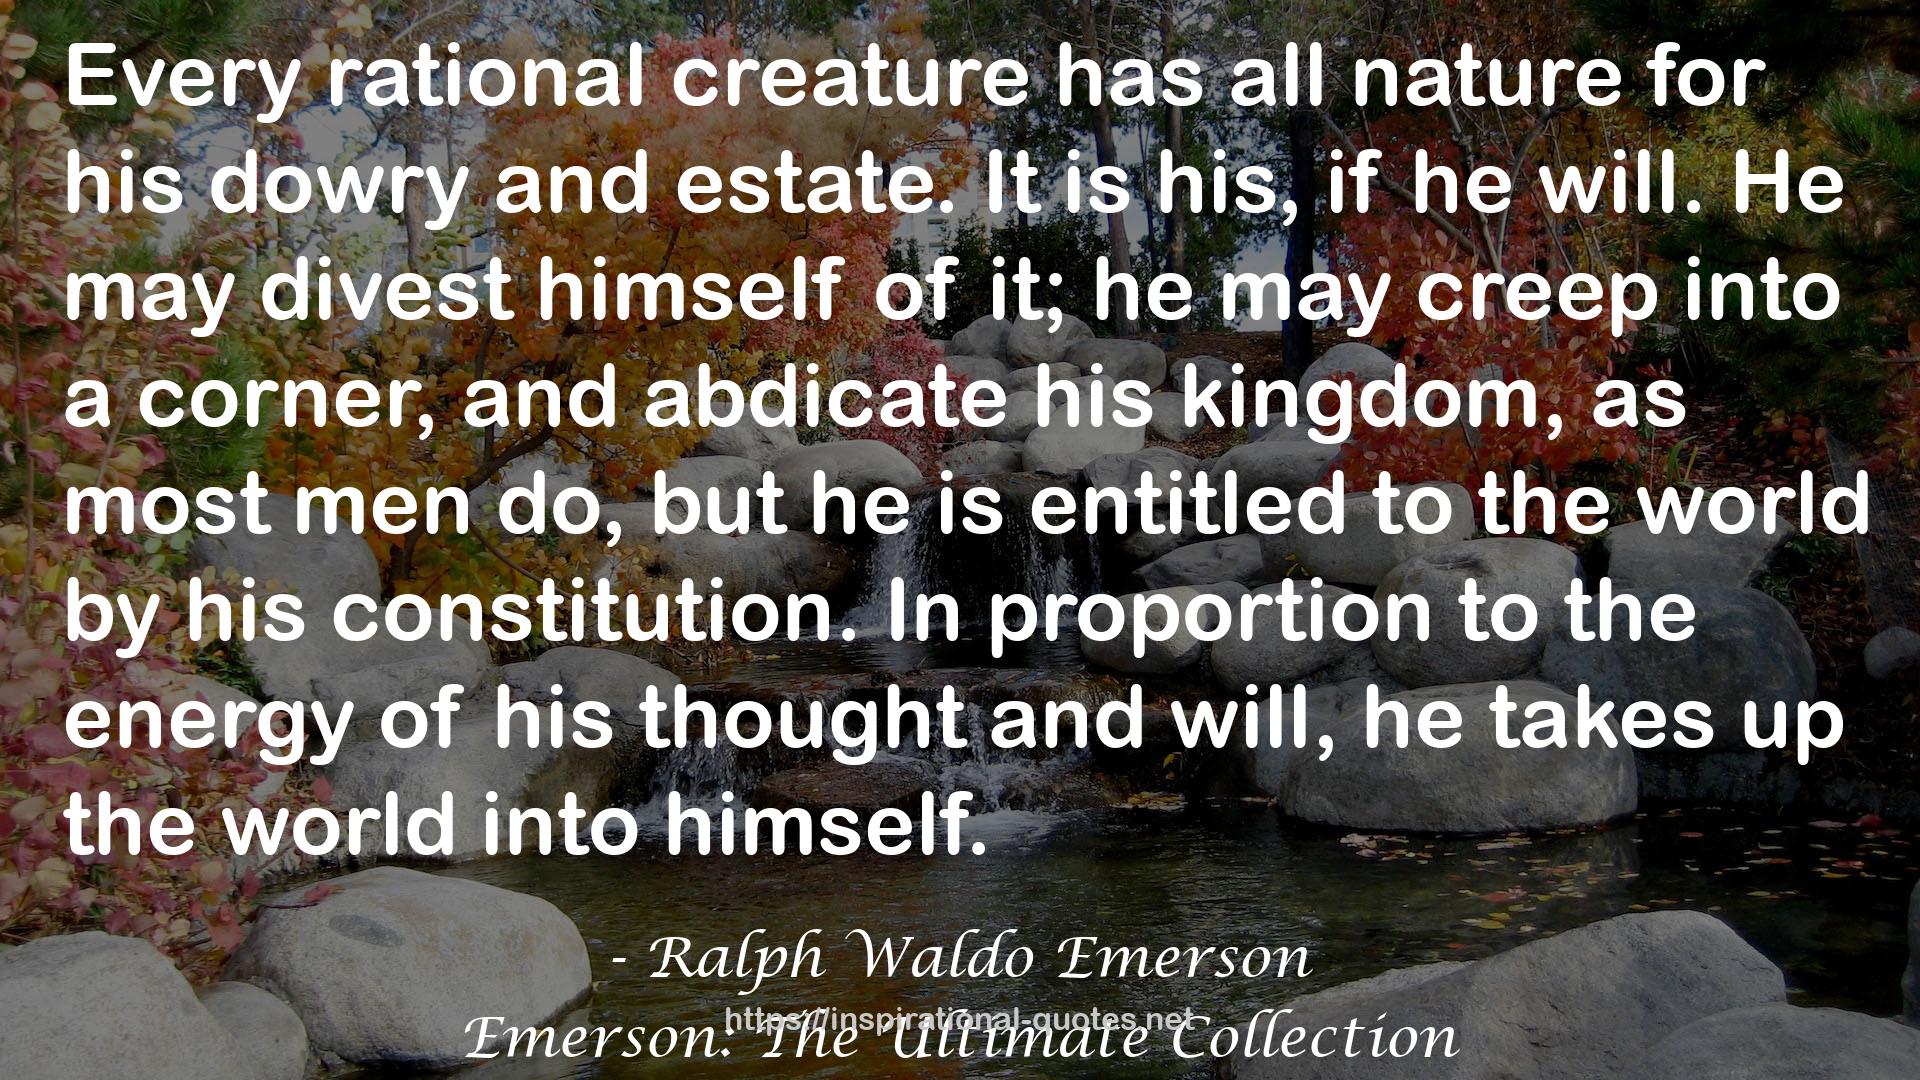 Emerson: The Ultimate Collection QUOTES